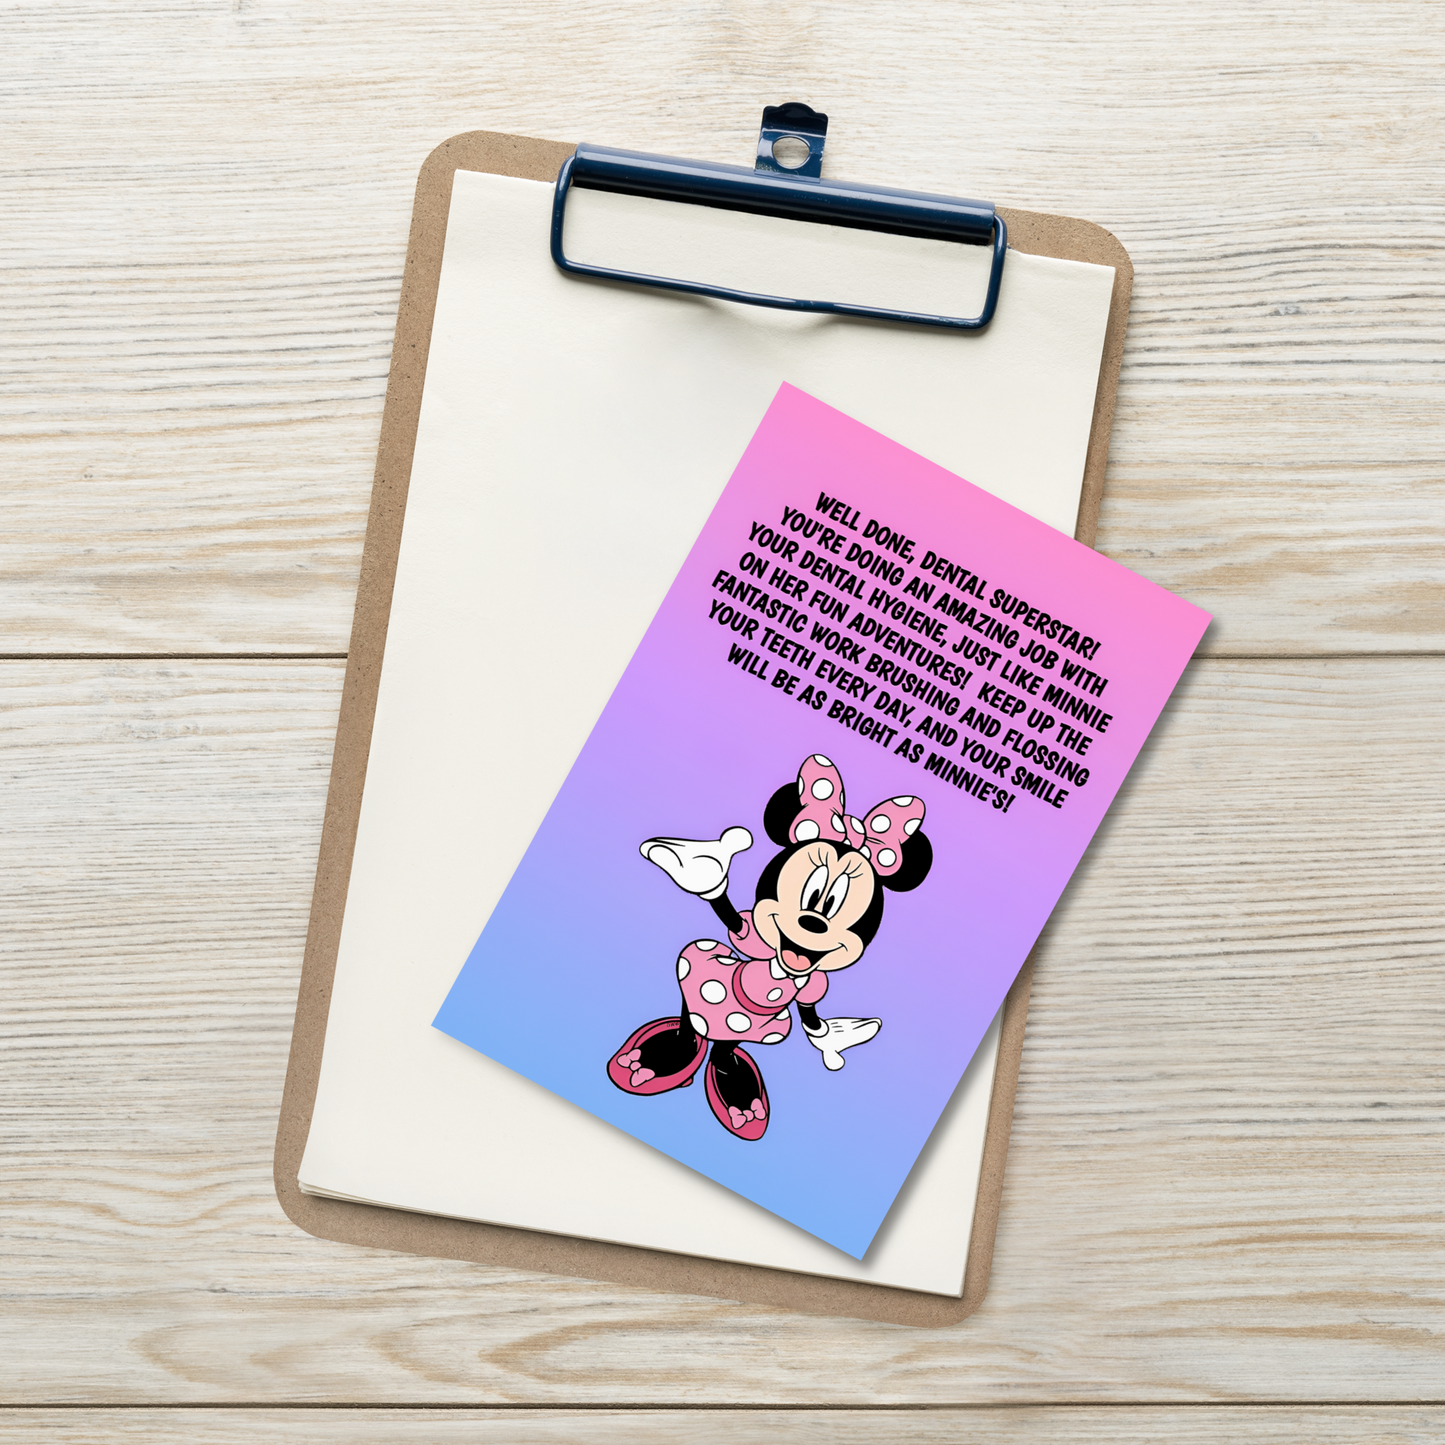 Minnie Mouse | Dental Motivational & Reward Cards- Well Done, Dental Superstar! You're Doing An Amazing Job With Your Dental Hygiene